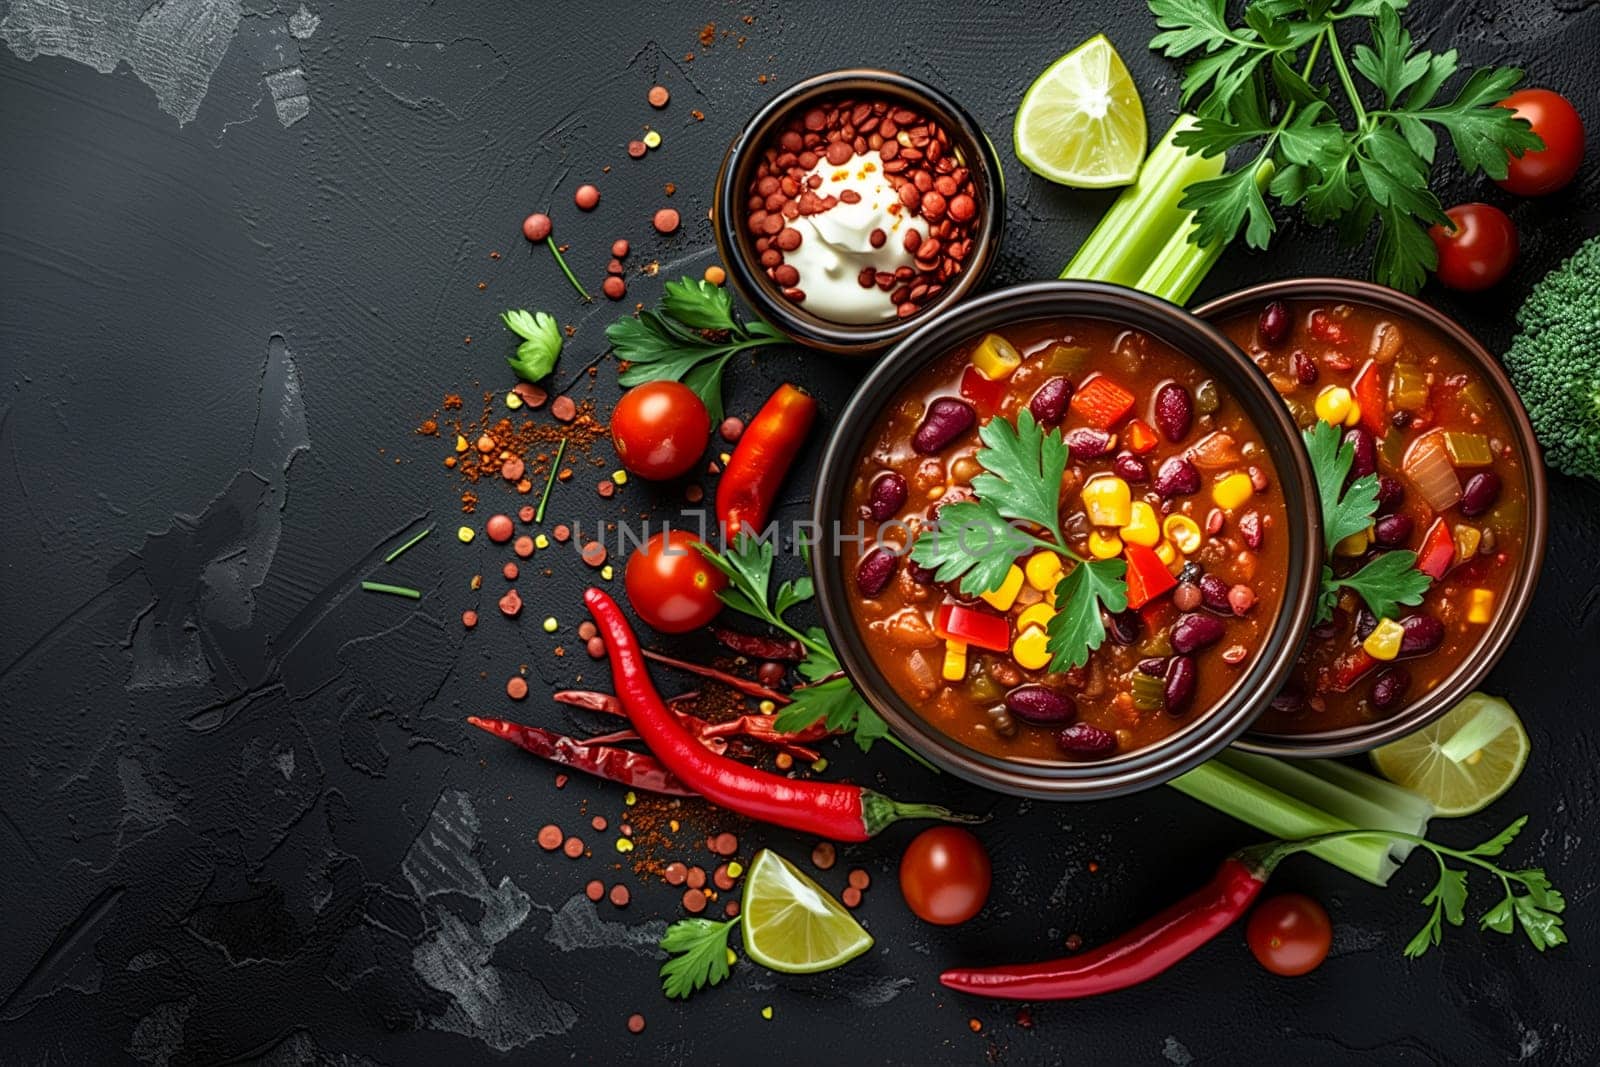 Three Bowls of Chili, Beans, and Broccoli on Black Surface by Sd28DimoN_1976